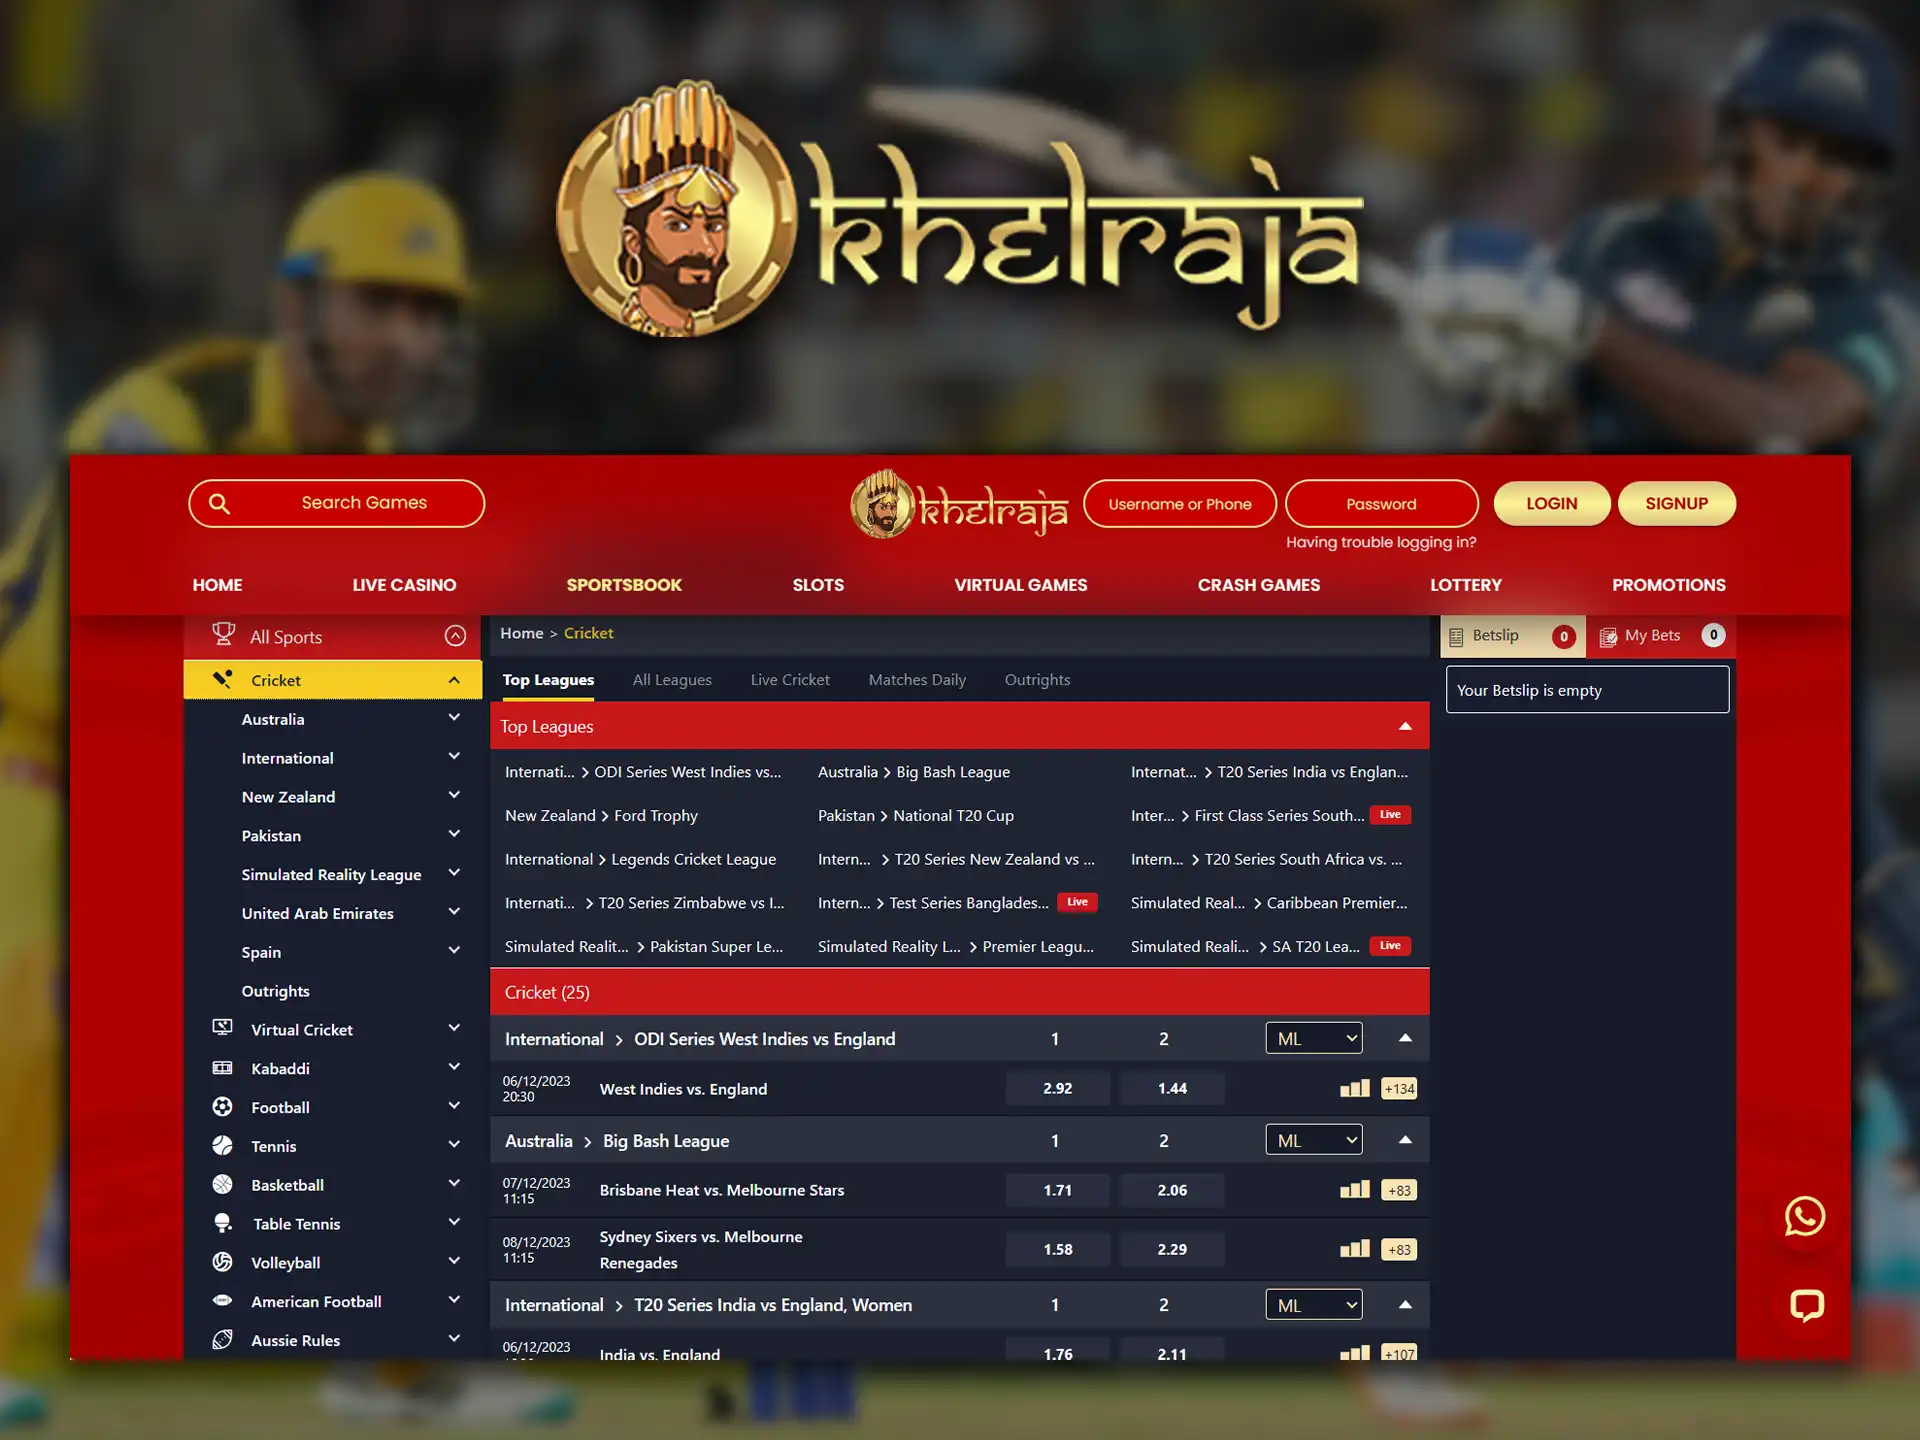 Khelraja is giving a welcome bonus of +300% up to INR 50,000 to new players.